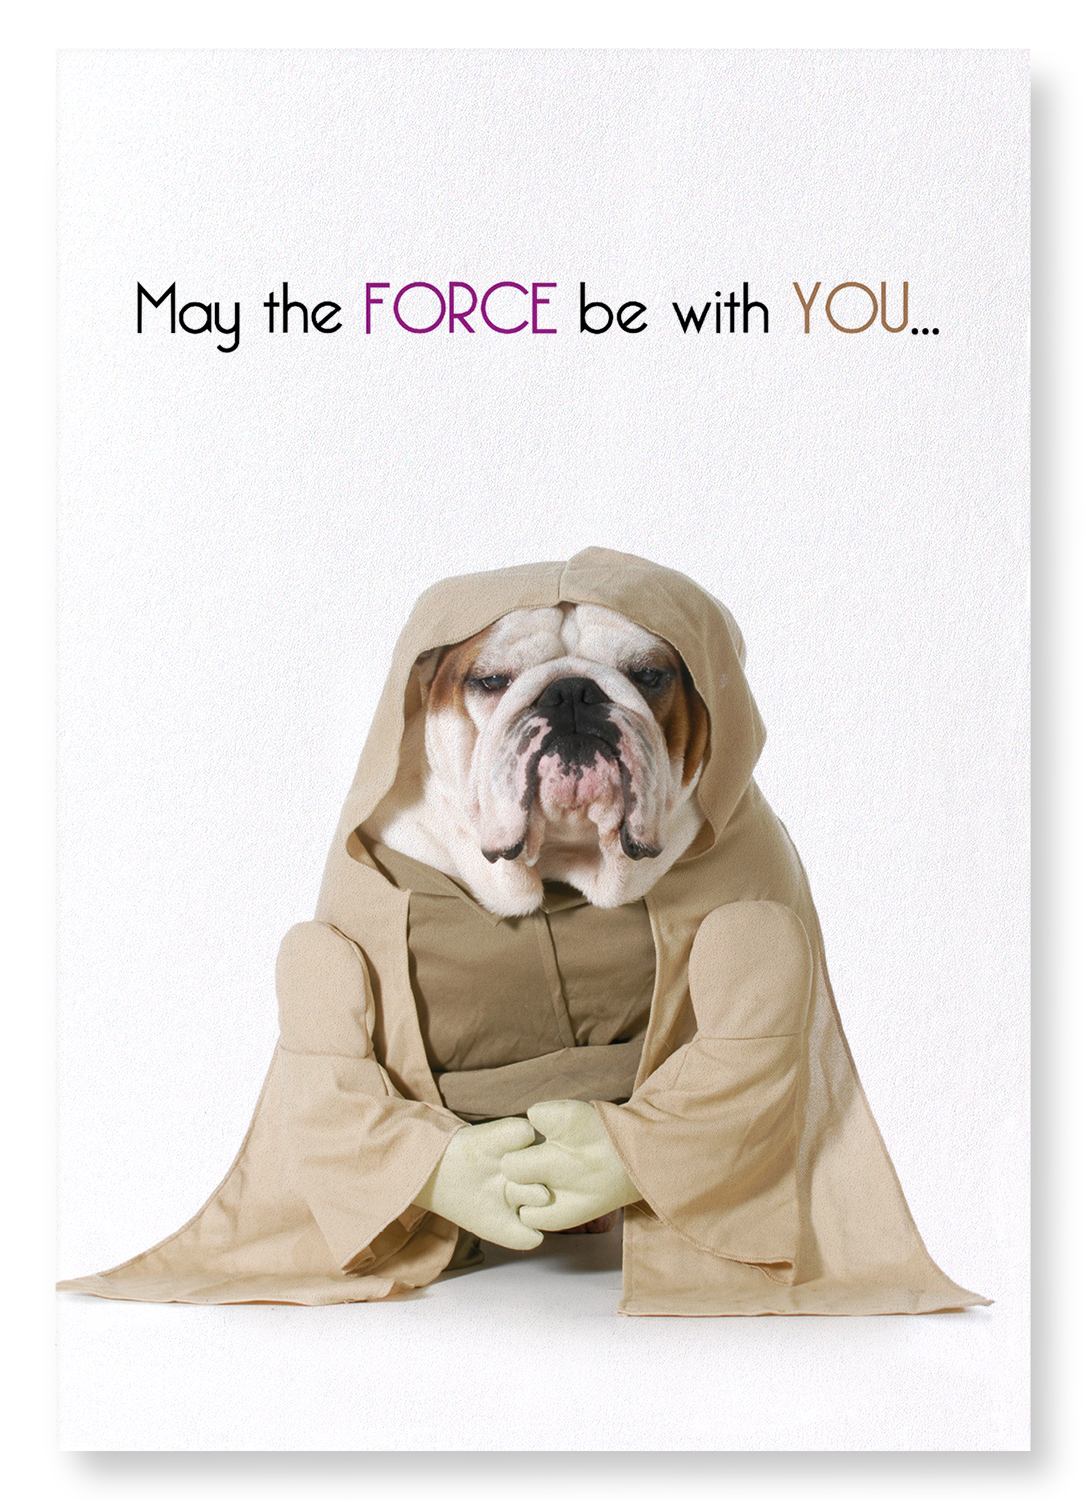 MAY THE FORCE BE WITH YOU: Funny Animal Art print